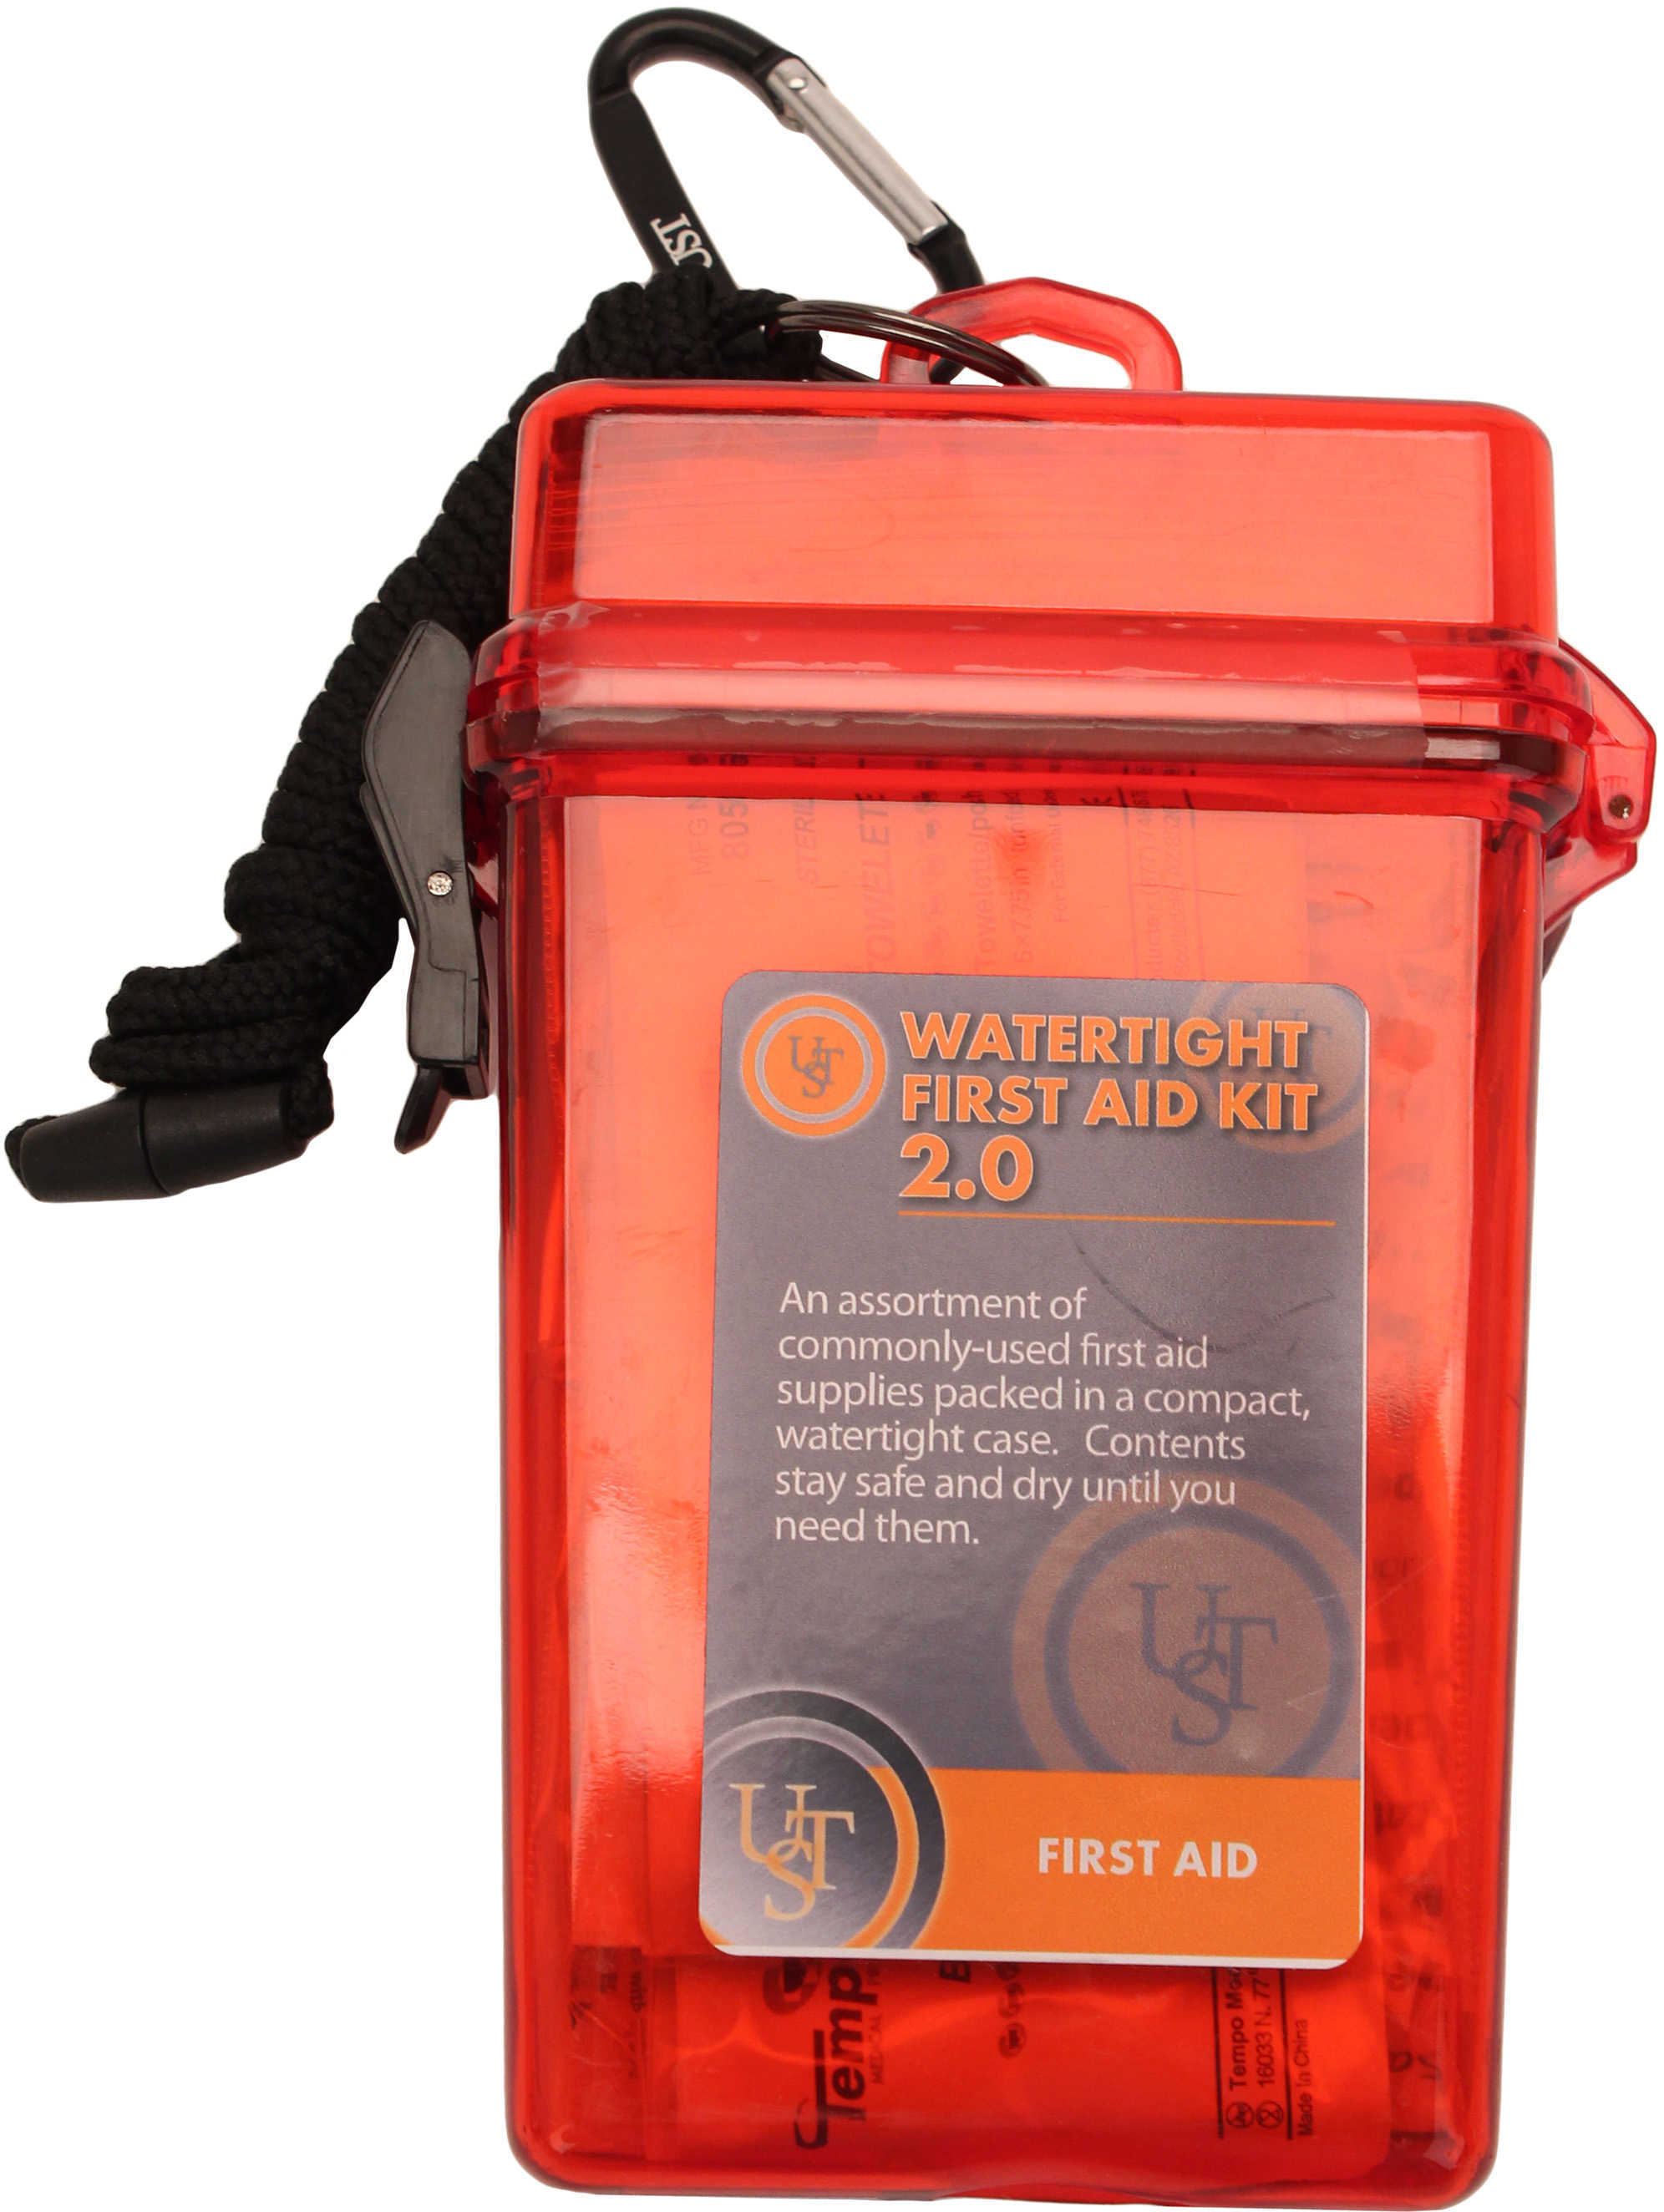 Ultimate Survival Technologies Watertight First Aid Kit 2.0, Red Md: 80-30-1470